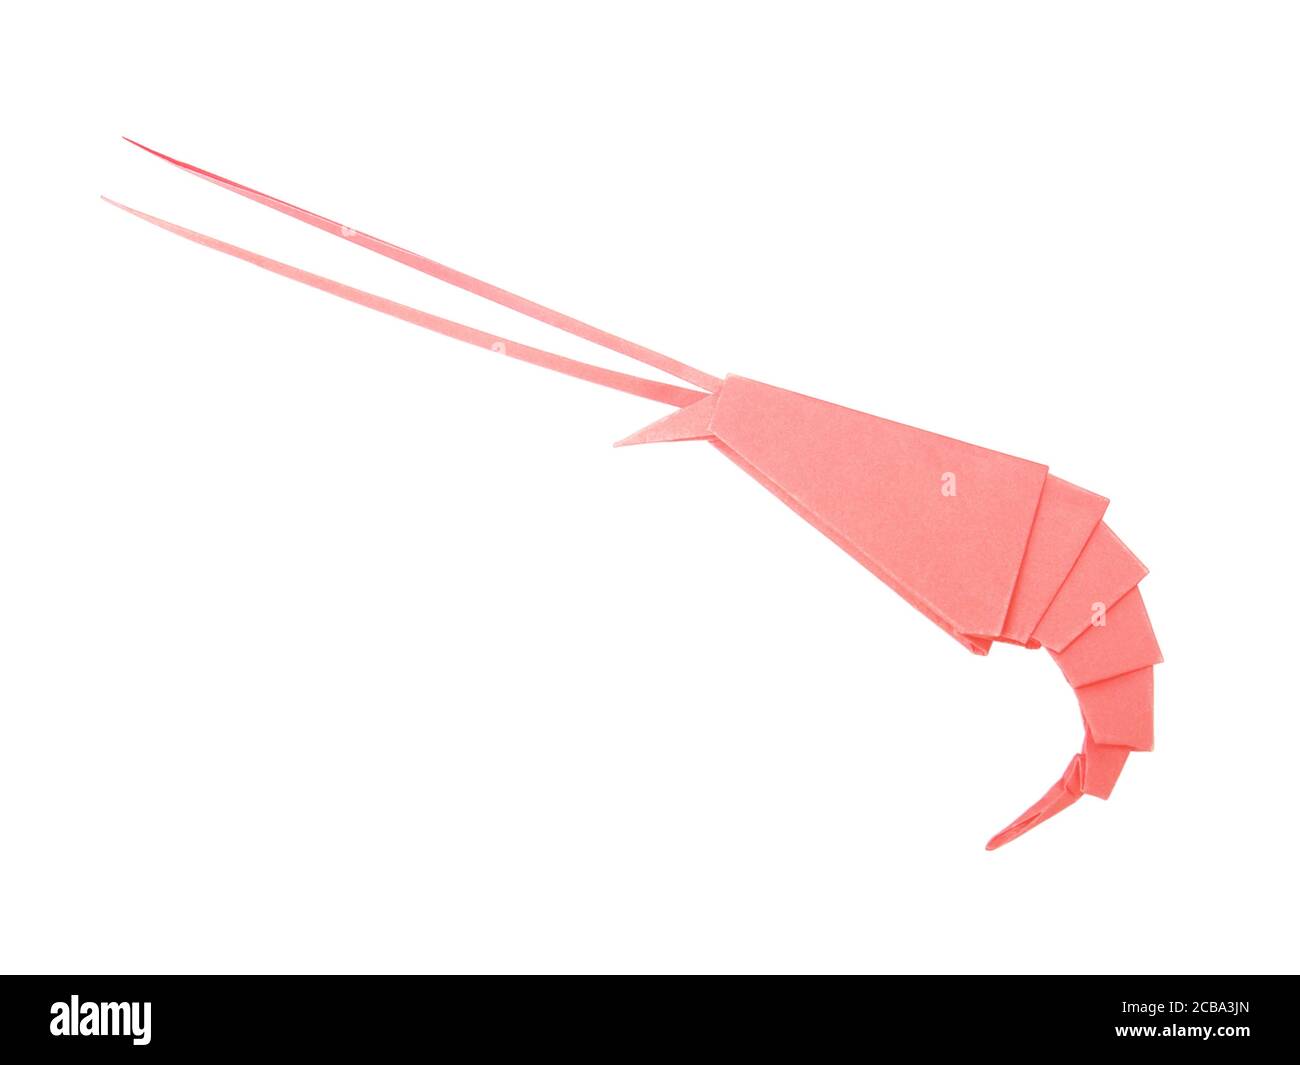 Origami paper of a cute shrimp for design element Stock Photo